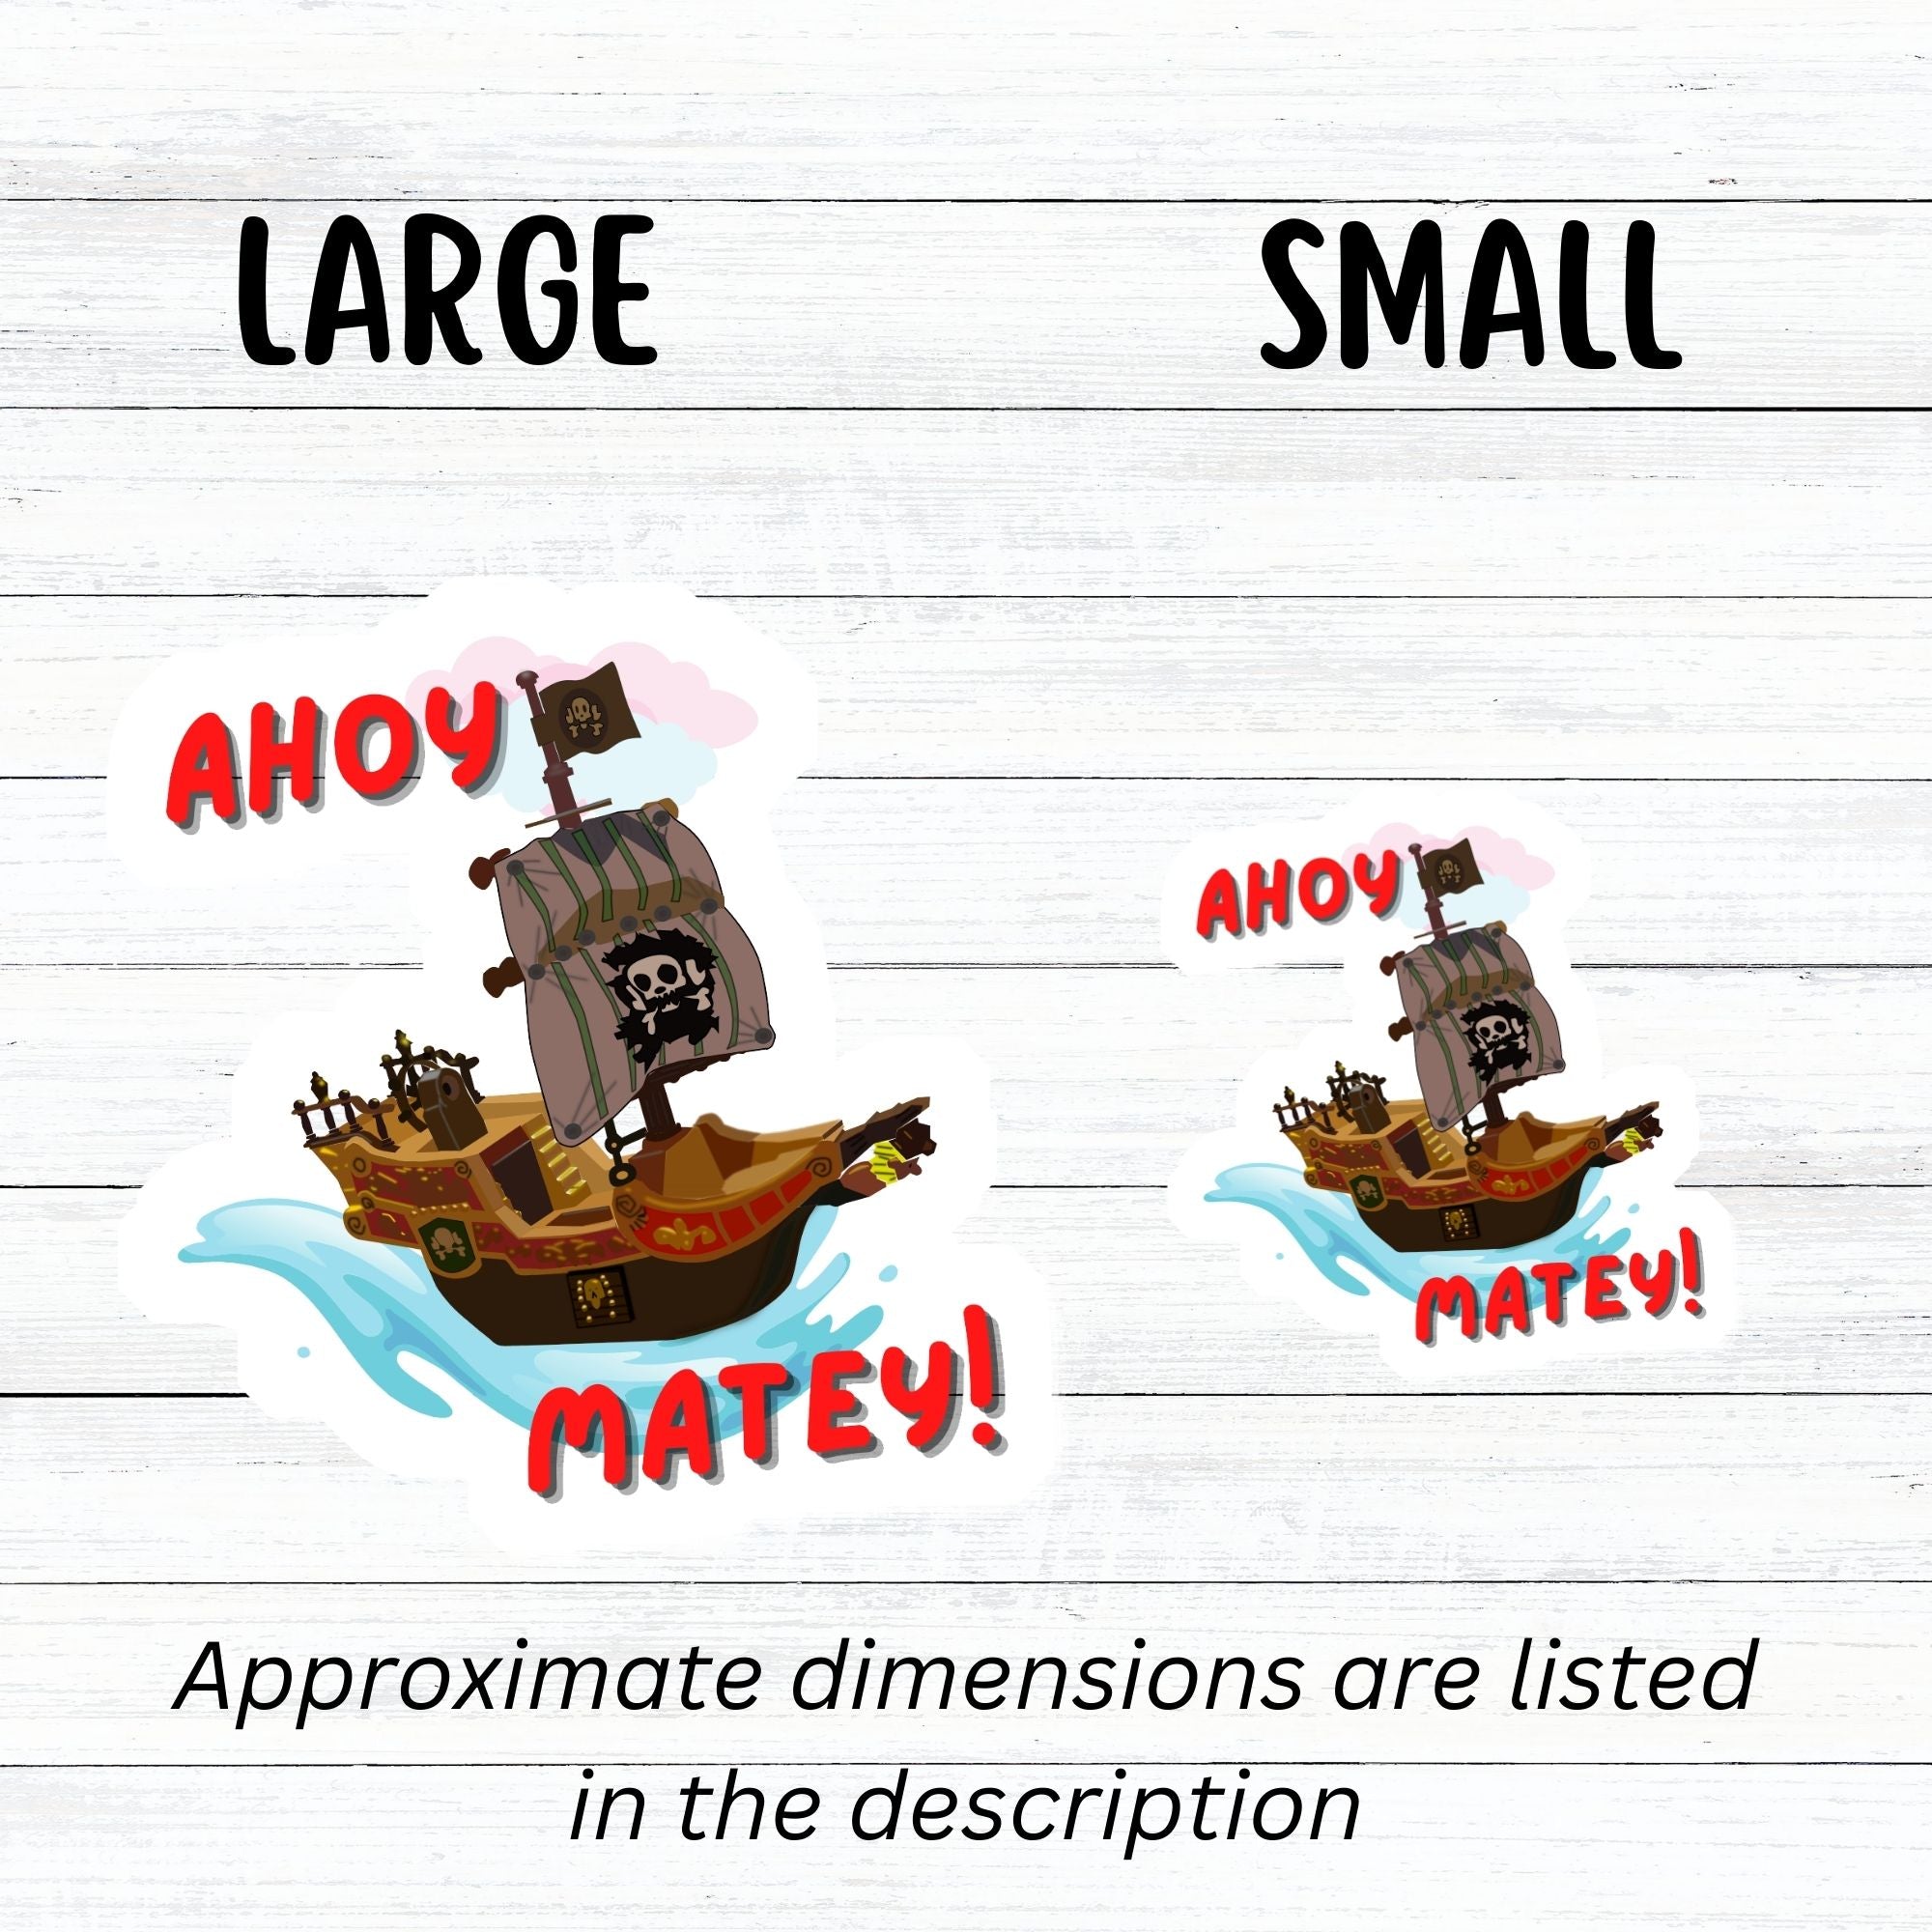 Hoist the main and prepare to board! This individual die-cut sticker is of a pirate ship under sail with the words "Ahoy Matey!" This image shows the large and small stickers next to each other. 